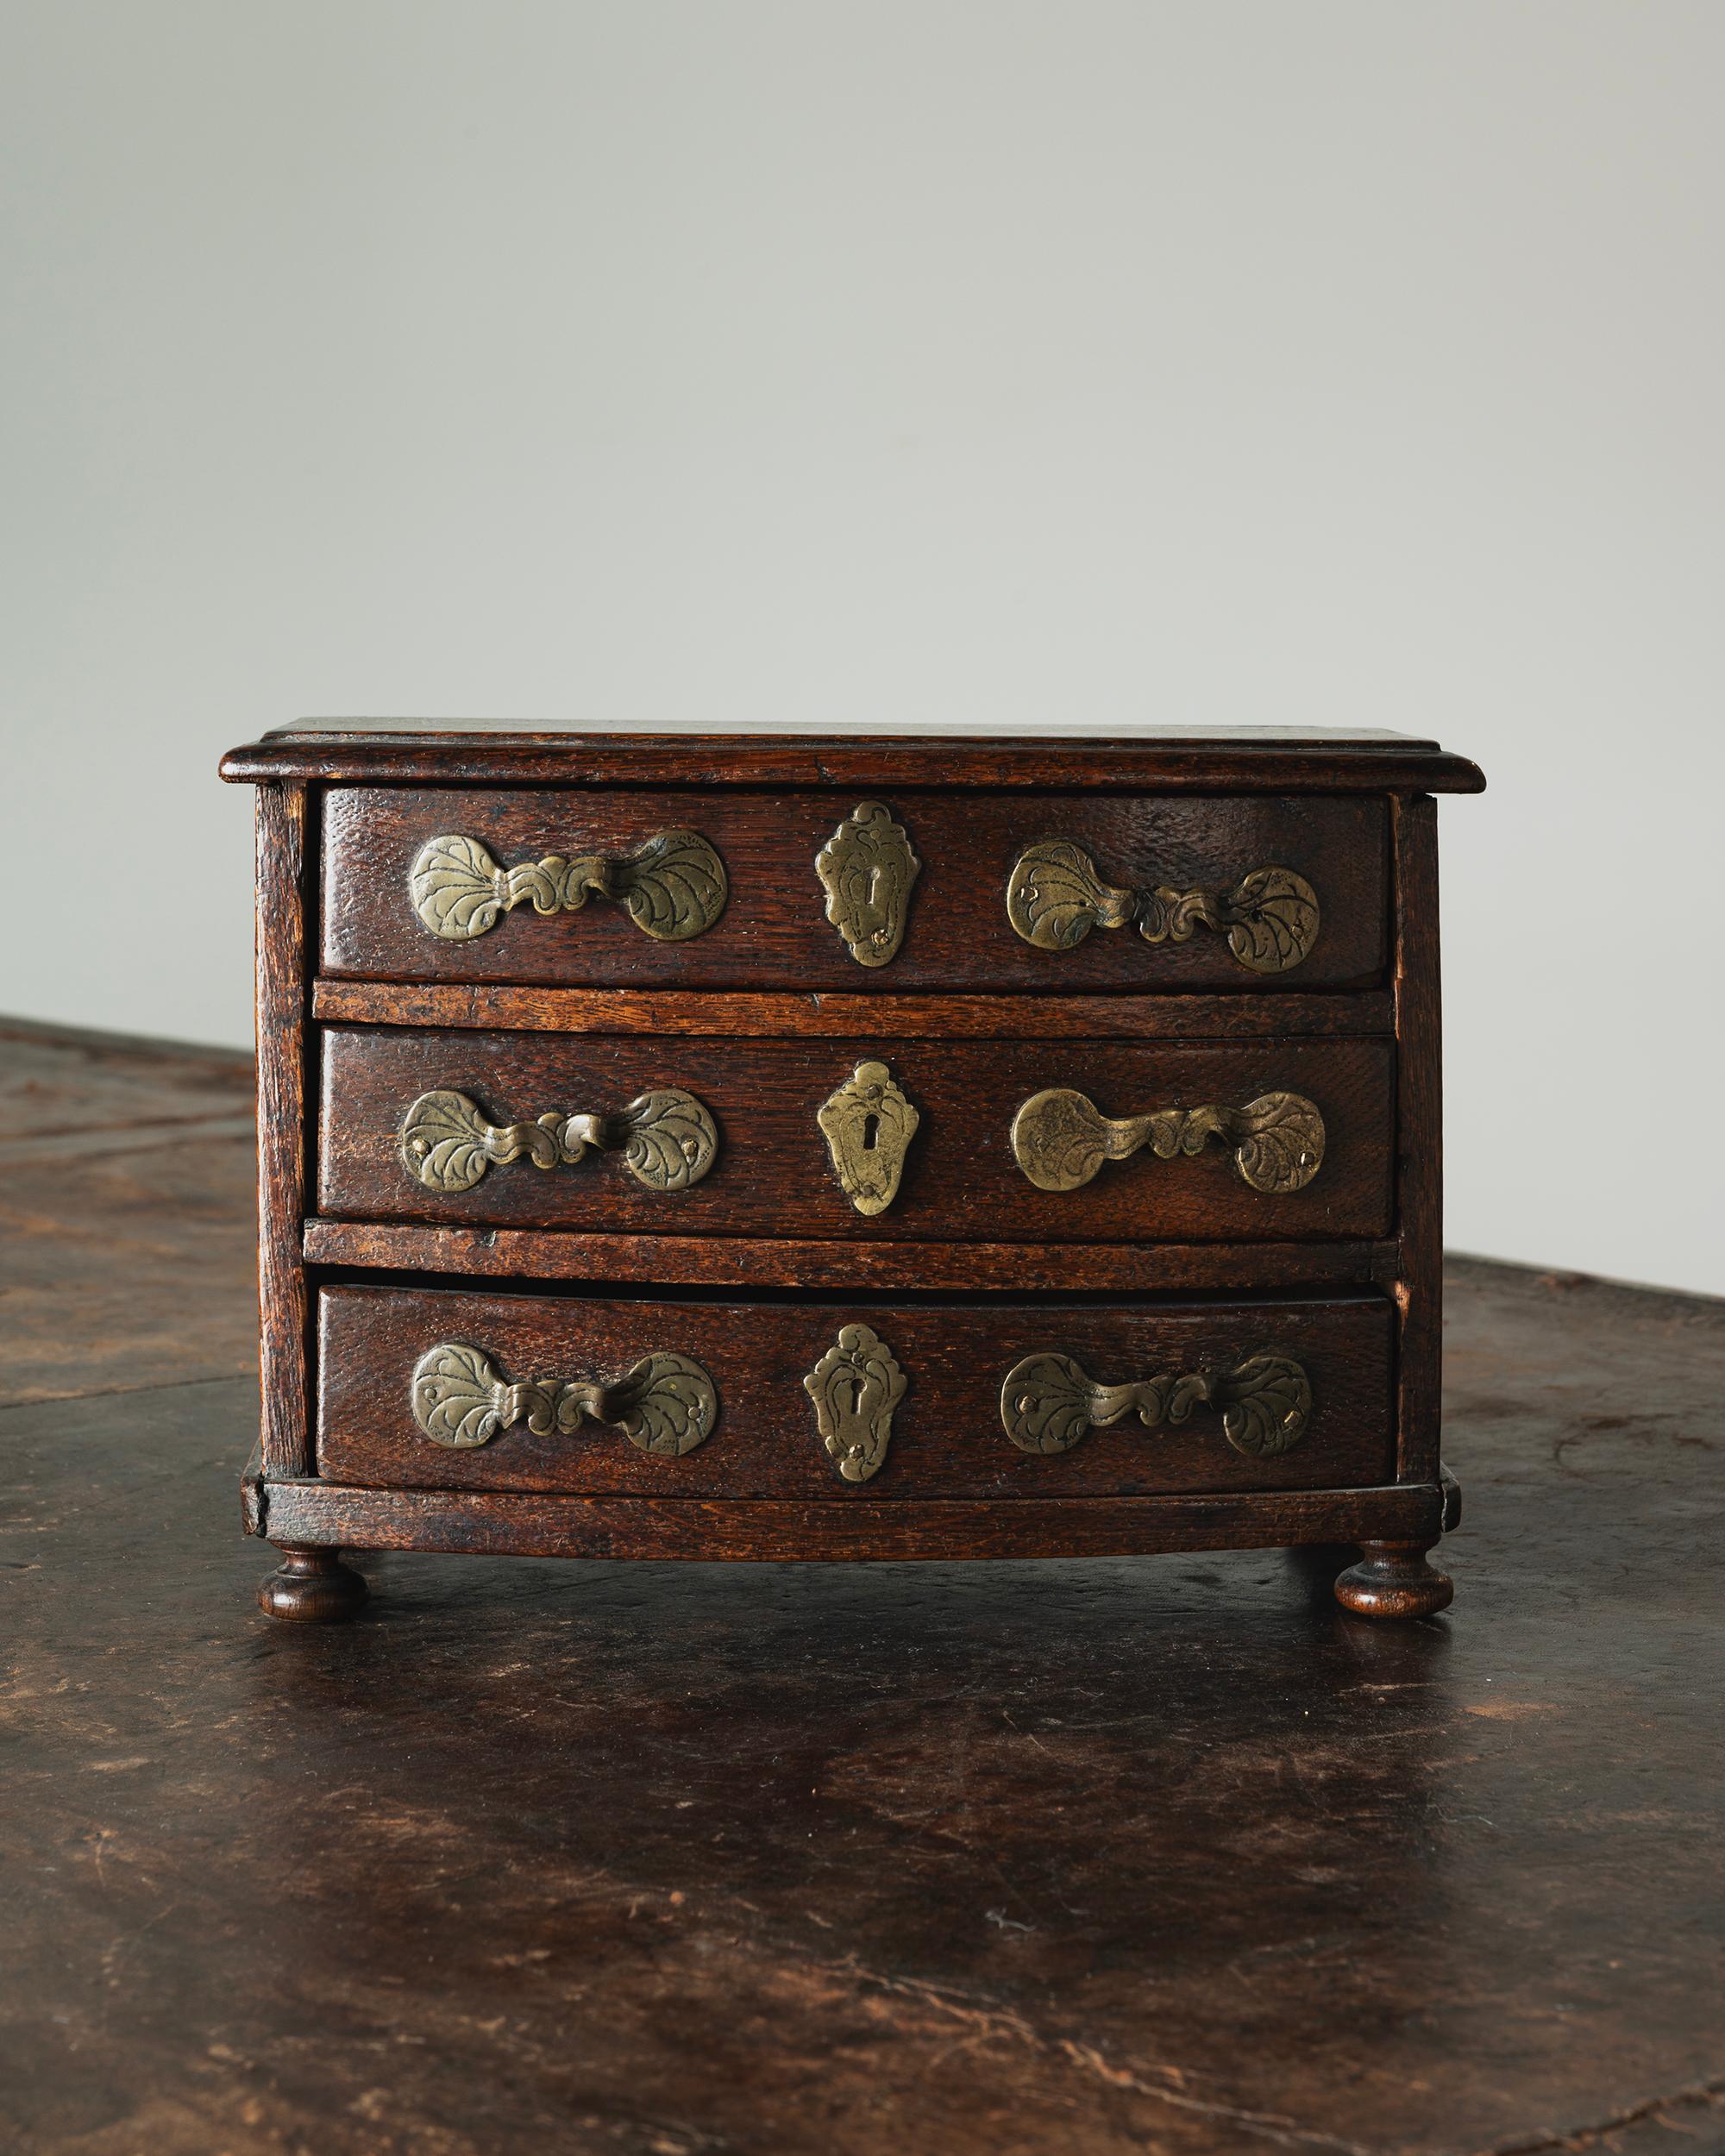 Good 18th century Swedish miniature Baroque jewellery box / commode in it's original finish with good patination. ca 1750 Sweden.  